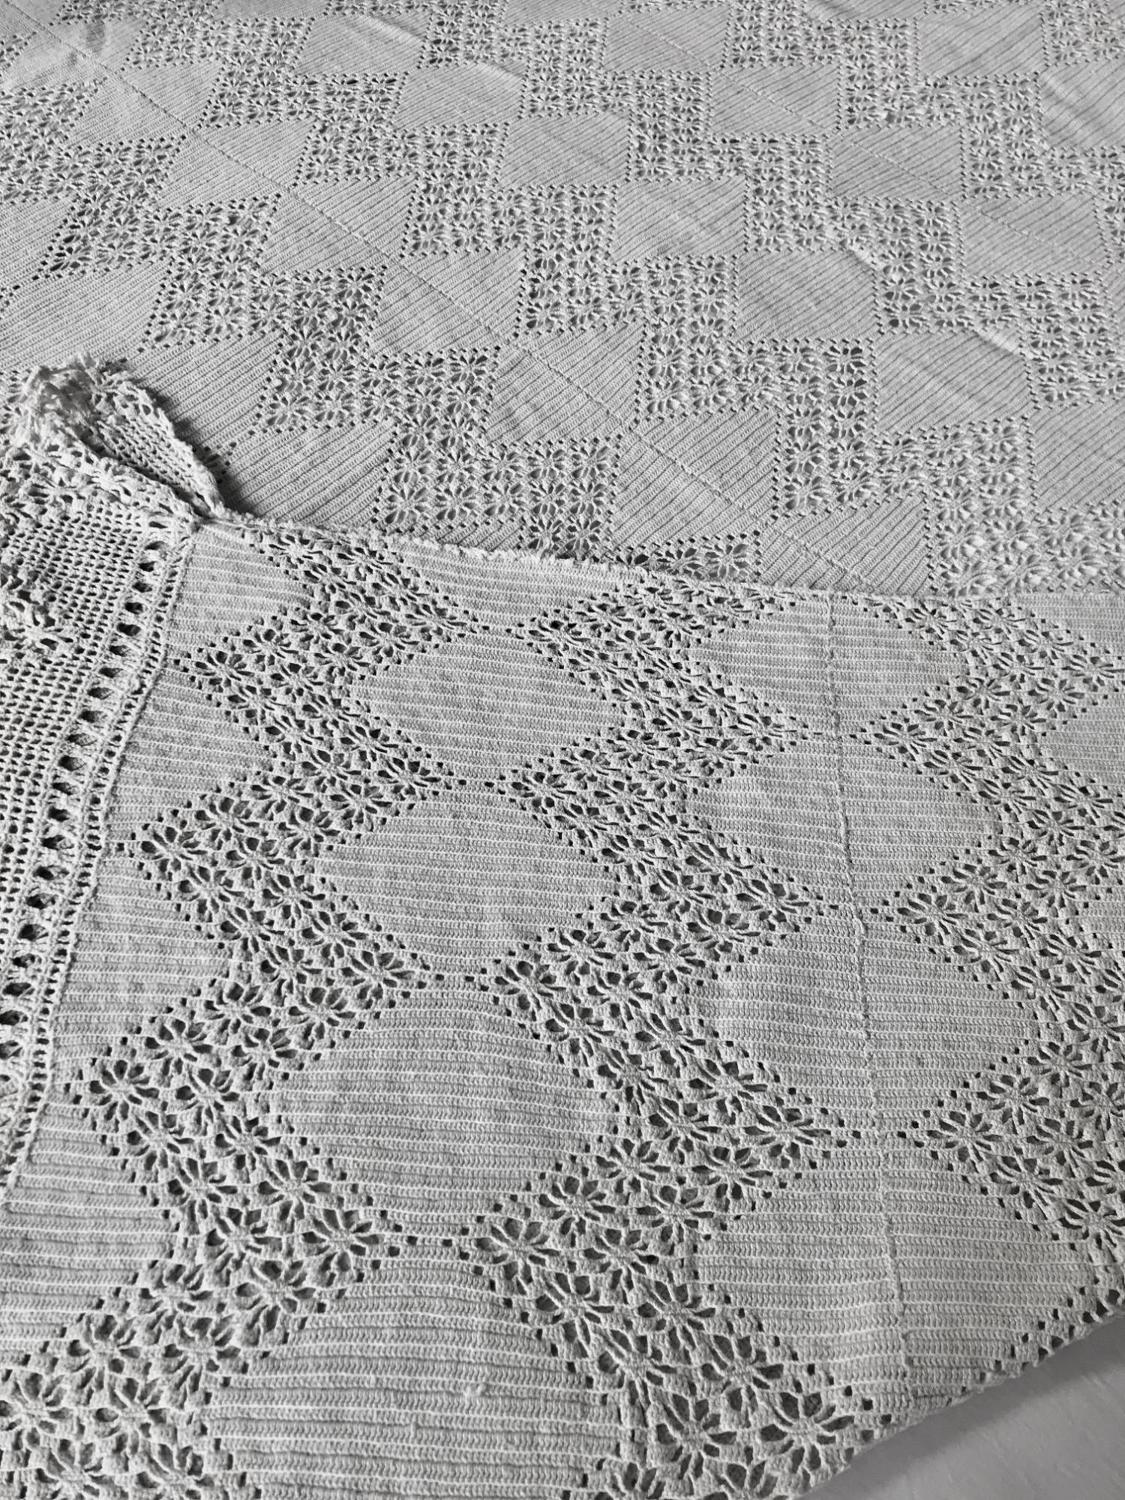 Vintage French Hand Crochet Bed Cover